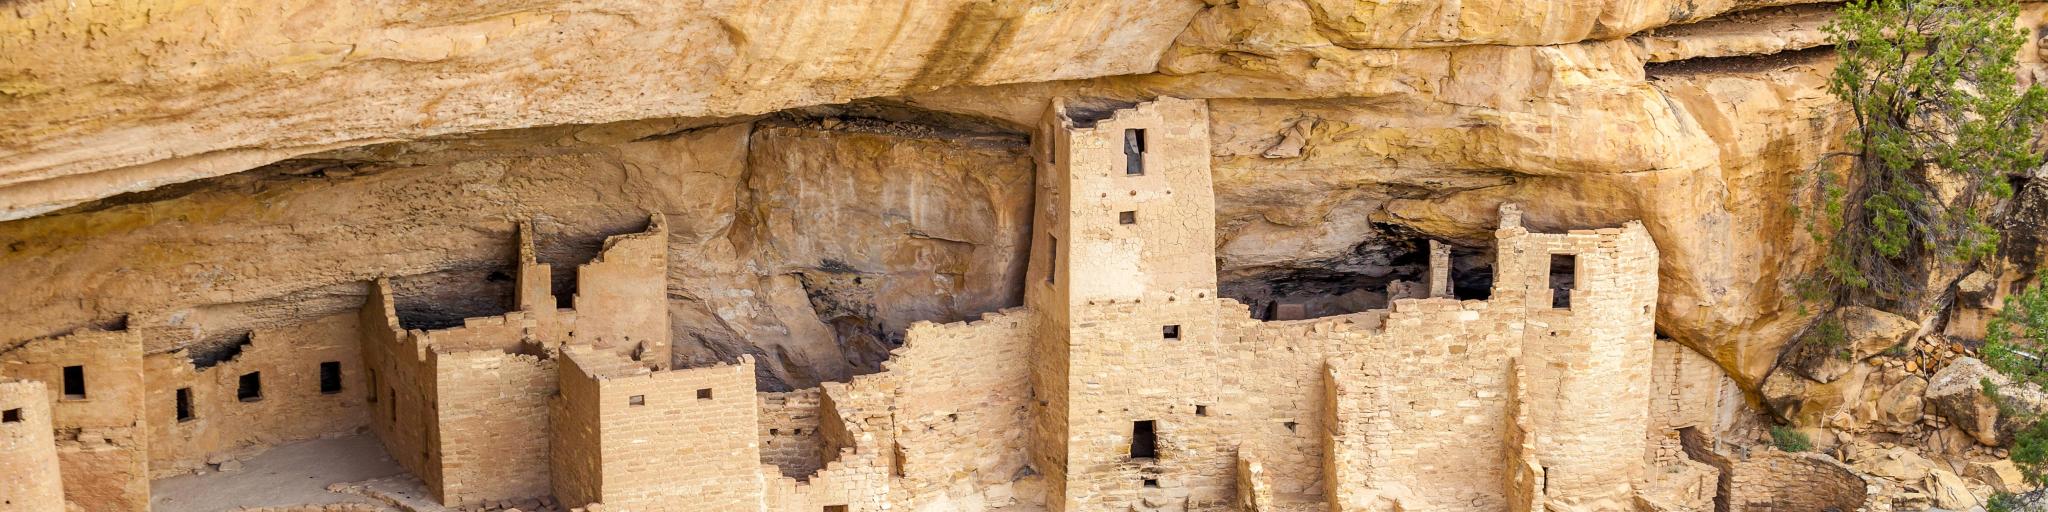 Sandy cliff dwellings nestled within the rockfaces at Mesa Verde National Park